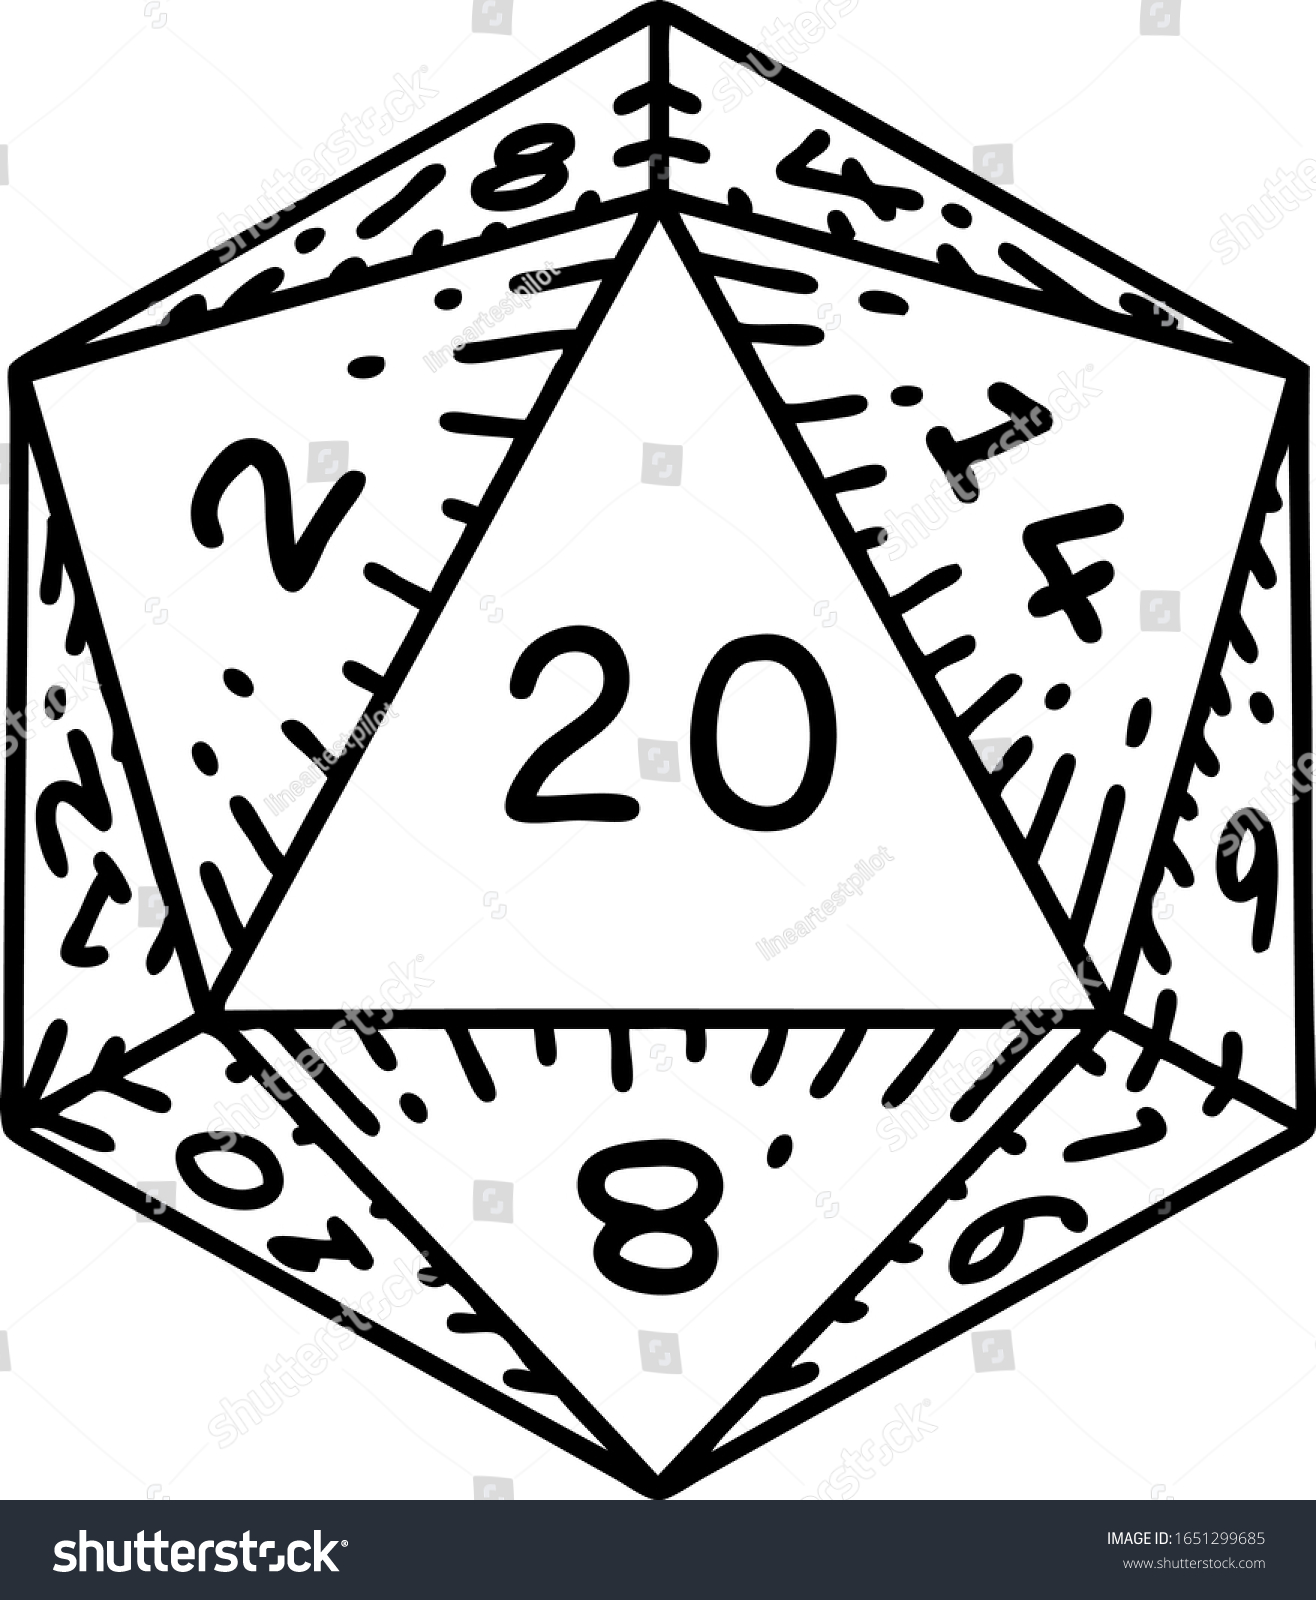 SVG of tattoo in black line style of a d20 dice svg